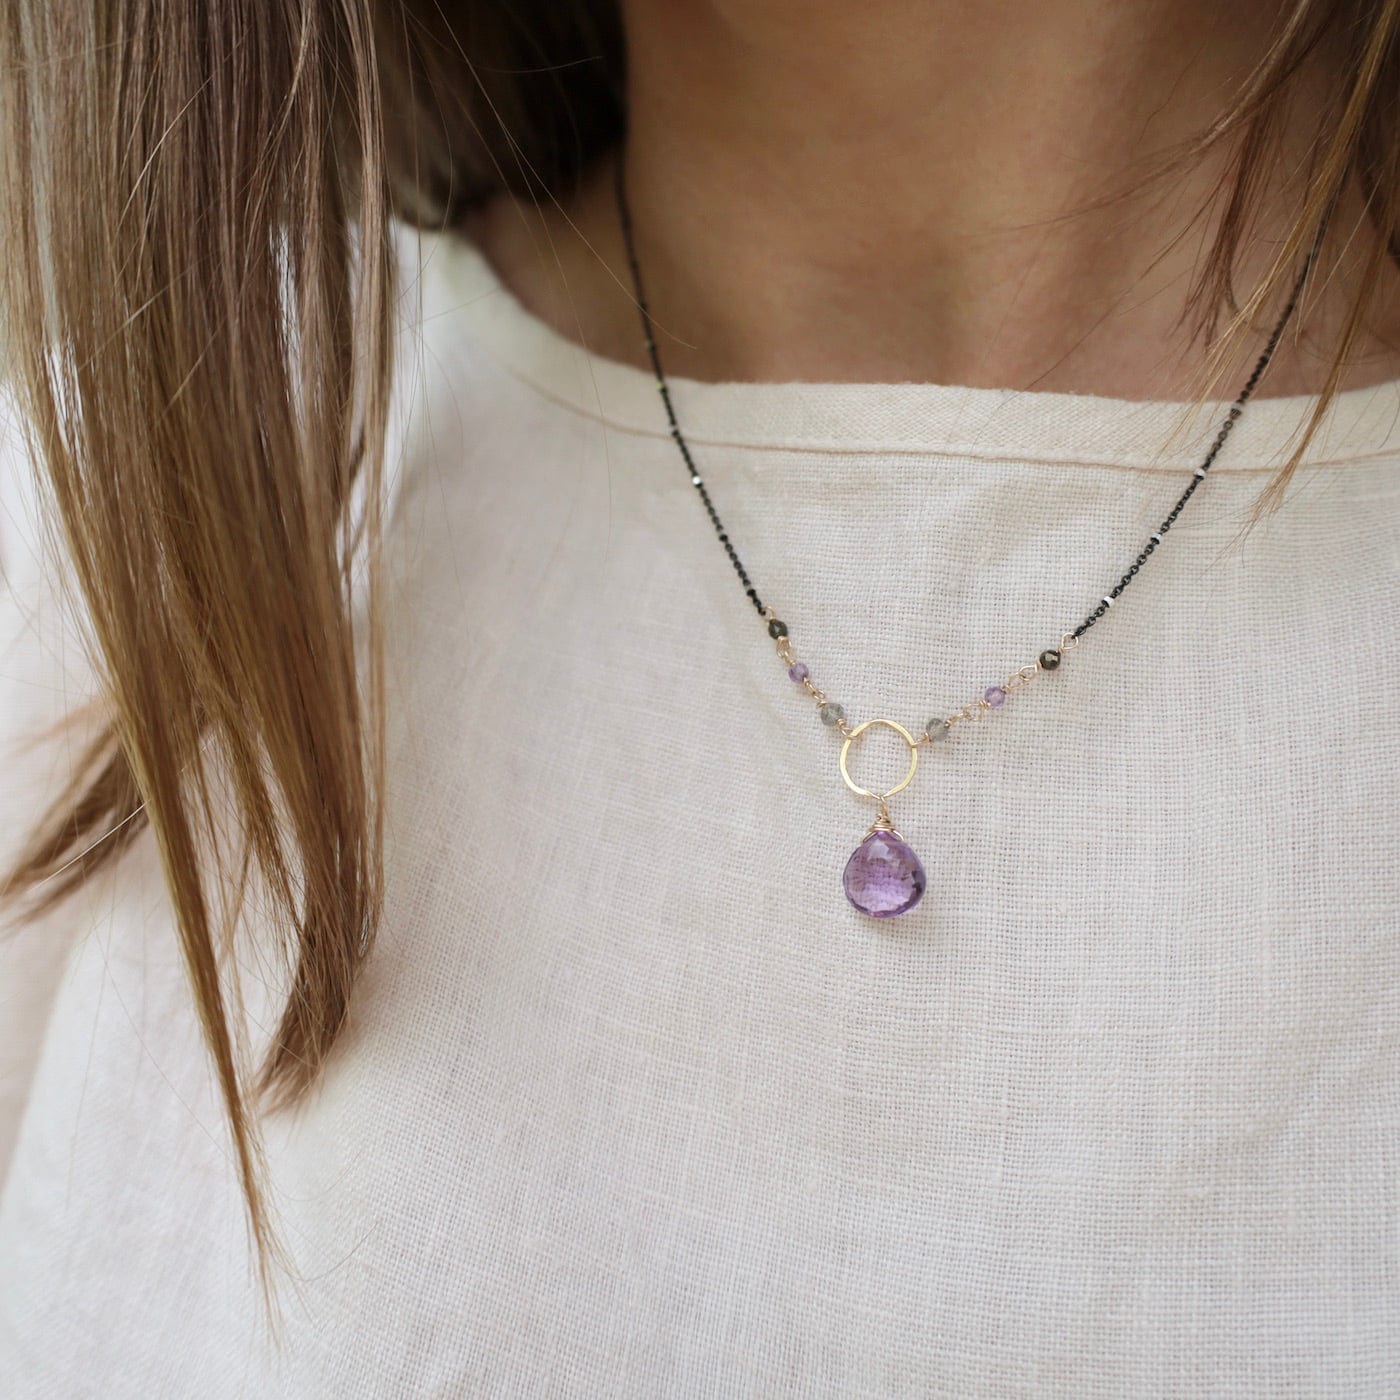 NKL-GF Gold Filled Ring with Pink Amethyst Drop Necklace